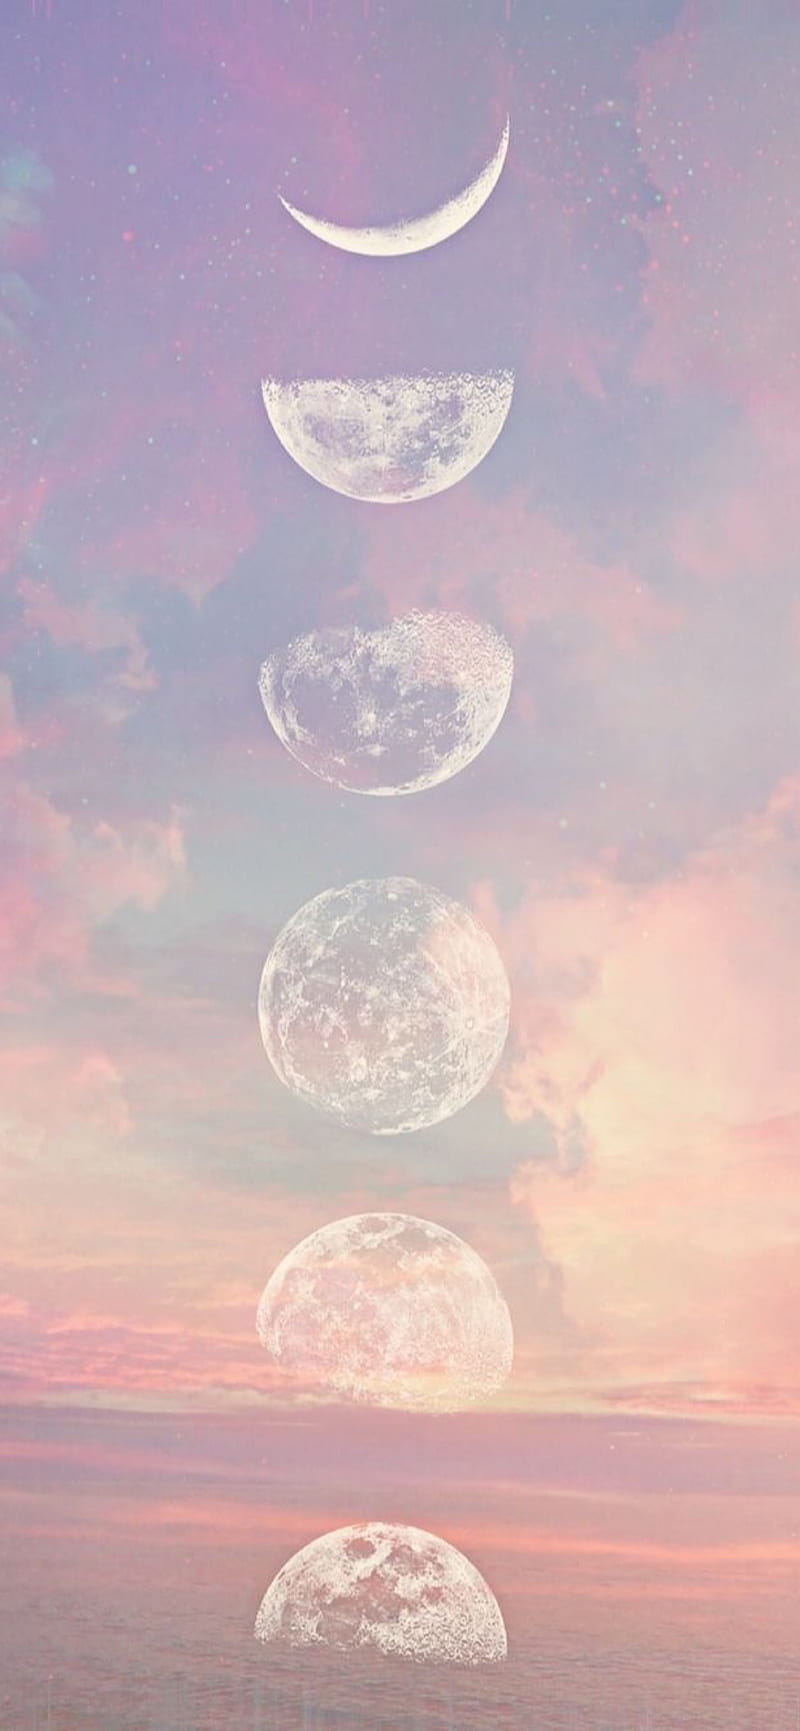 Moon phases wallpaper, pink and purple sky, aesthetic backgrounds, ocean in the background - Moon phases